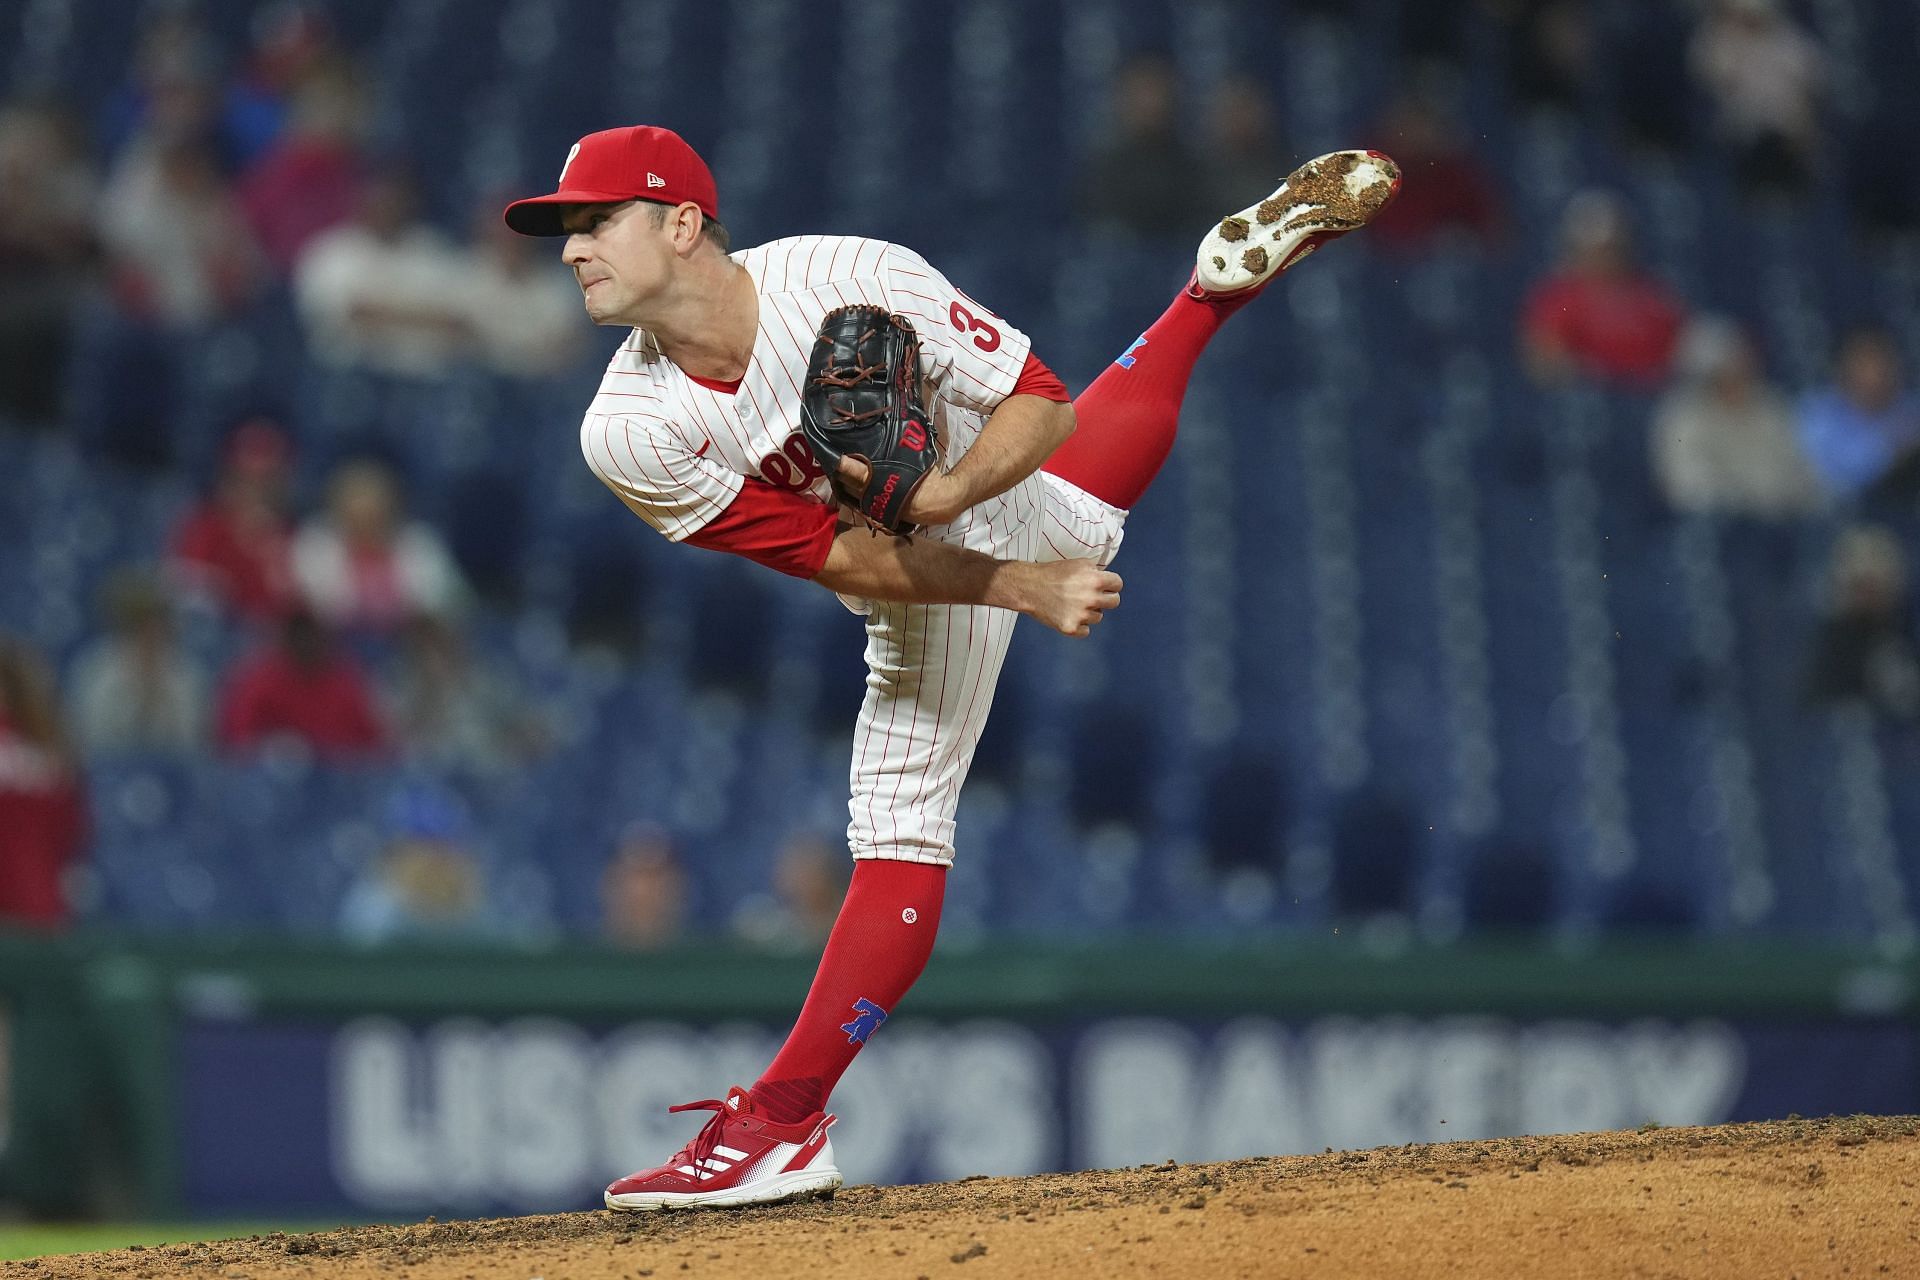 David Robertson throws a pitch in the top of the ninth inning against the Miami Marlins at Citizens Bank Park